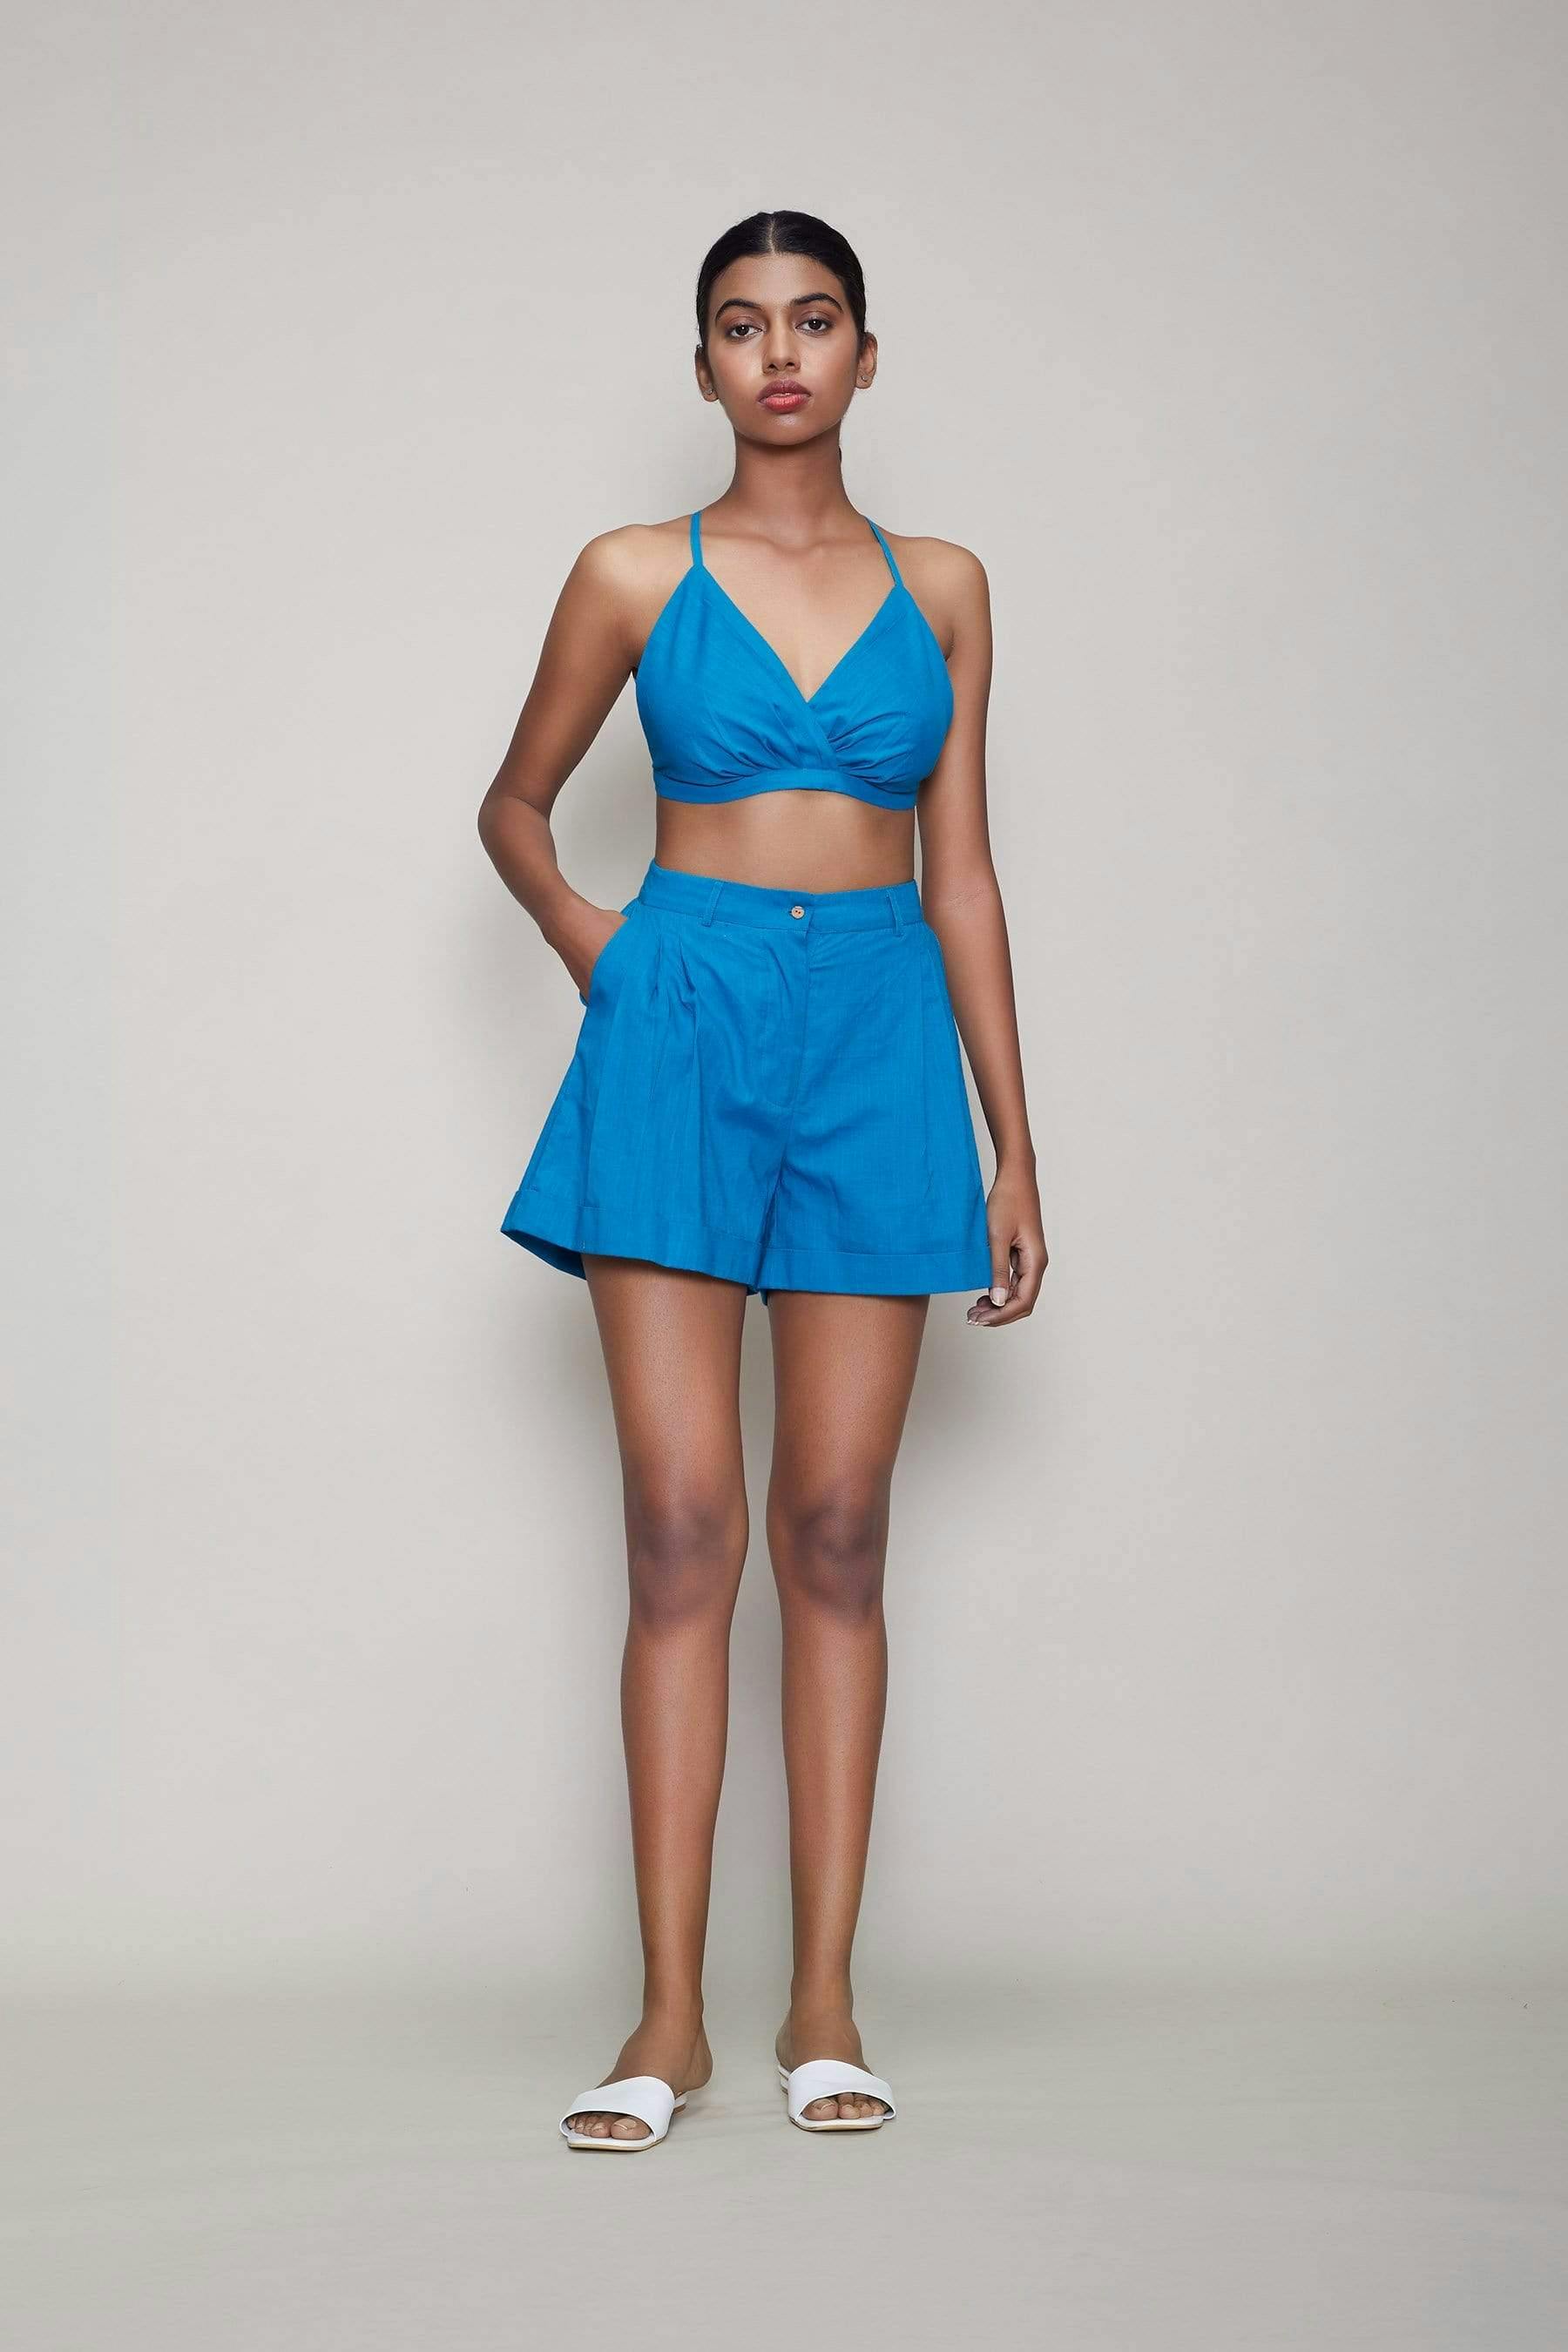 Mati Rang Bralette - Blue, a product by Style Mati